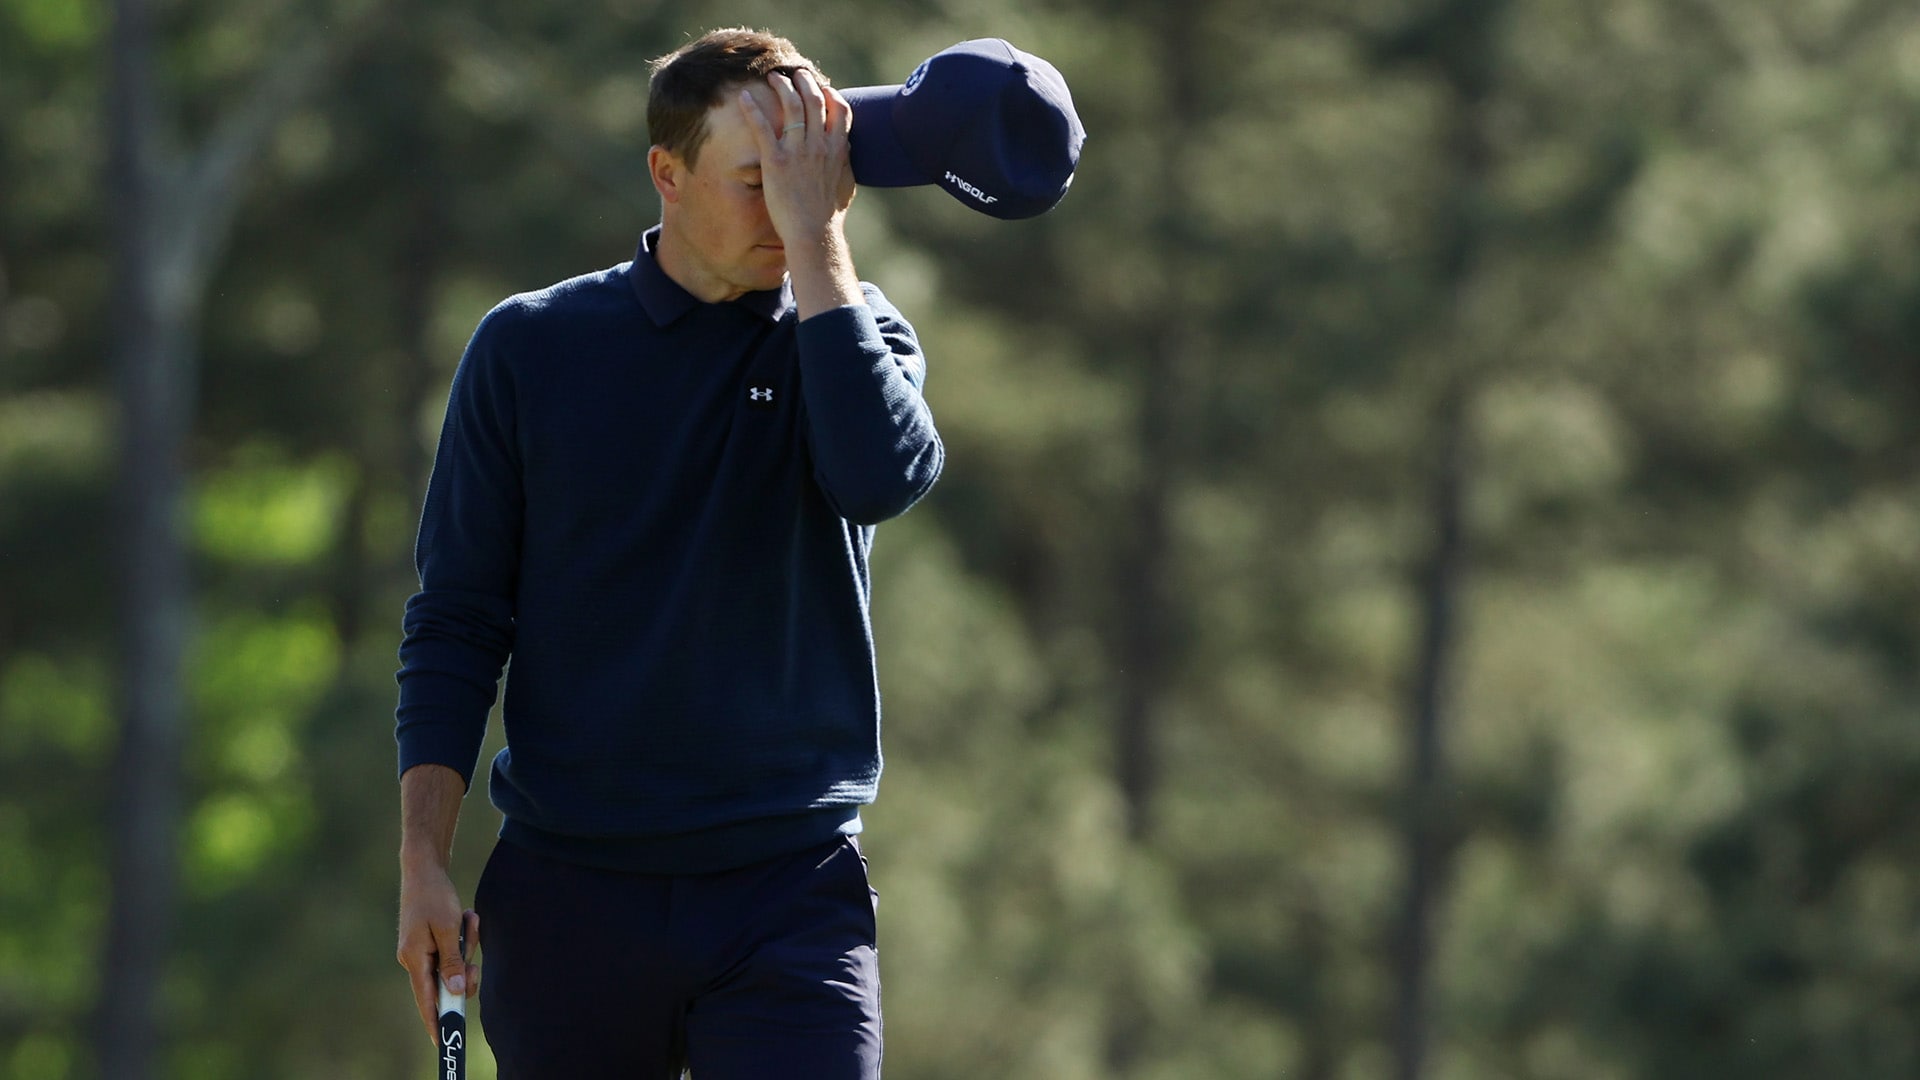 Jordan Spieth charges, can’t make up ground after playing ‘Way too much golf’